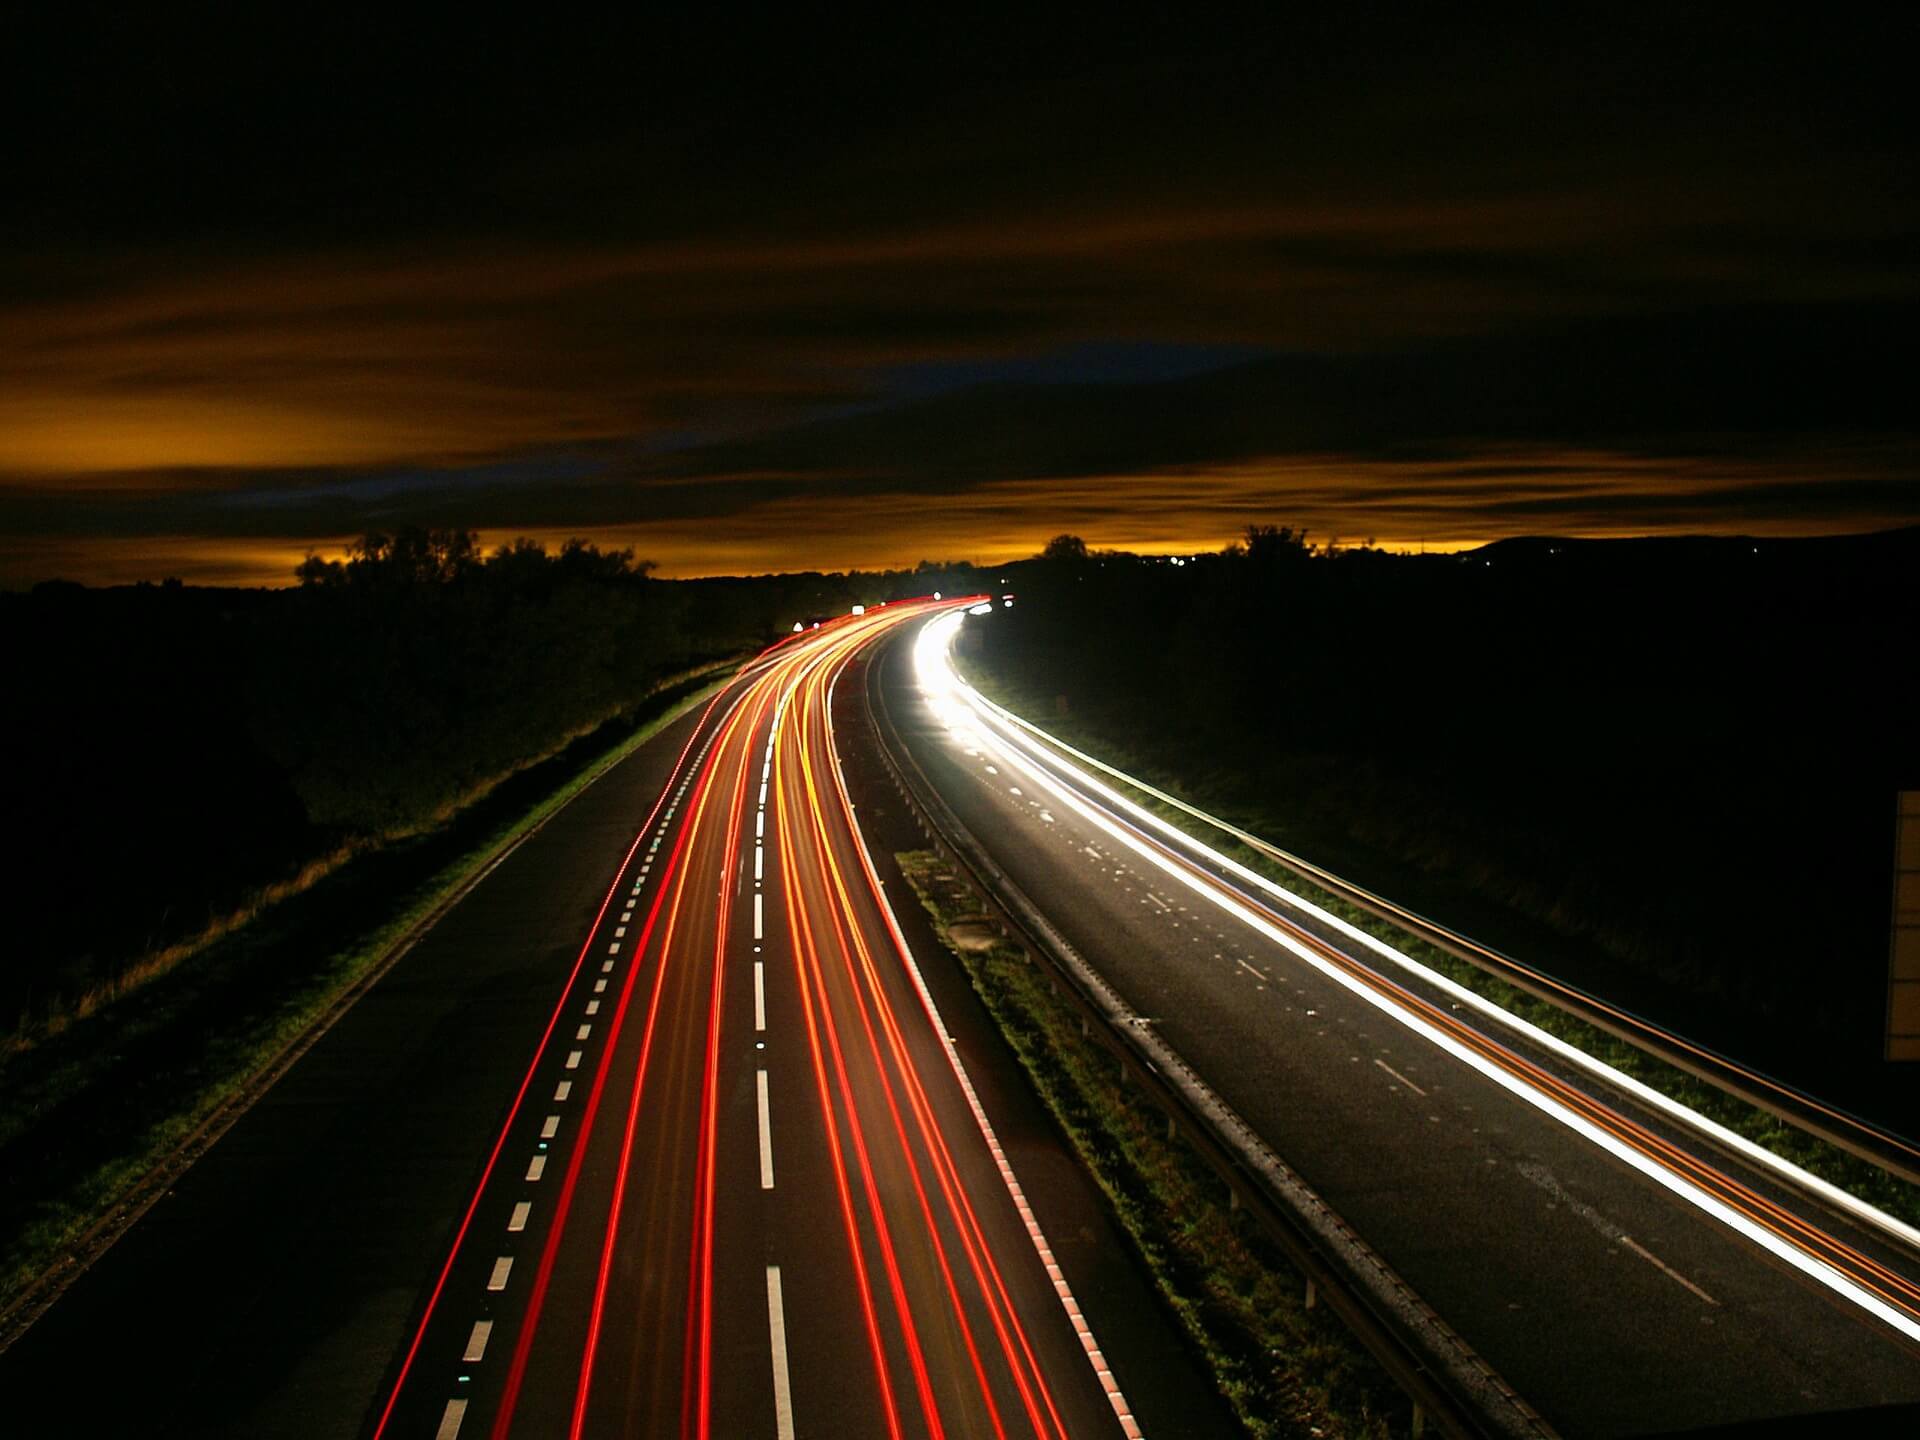 Cars on a motorway at night, only red and white stripes are visible through long exposure of the camera